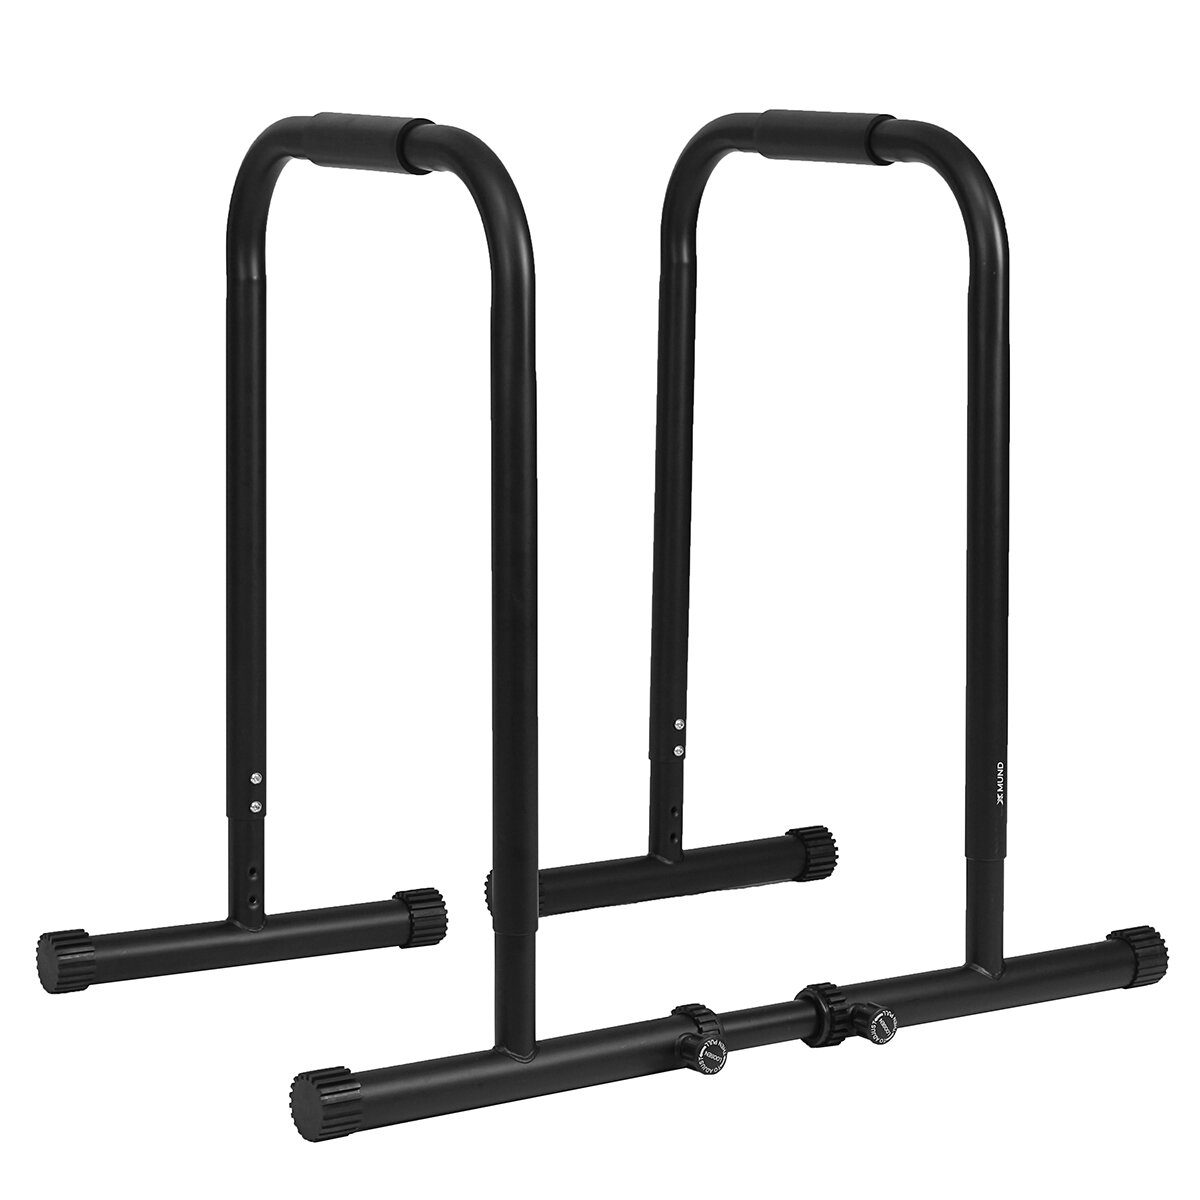 [EU Direct] XMUND XD-PB2 Dip Bar Workout Parallel Bars Multi-Function Pull Up Stand Home Gym Fitness Max Loading 150kg